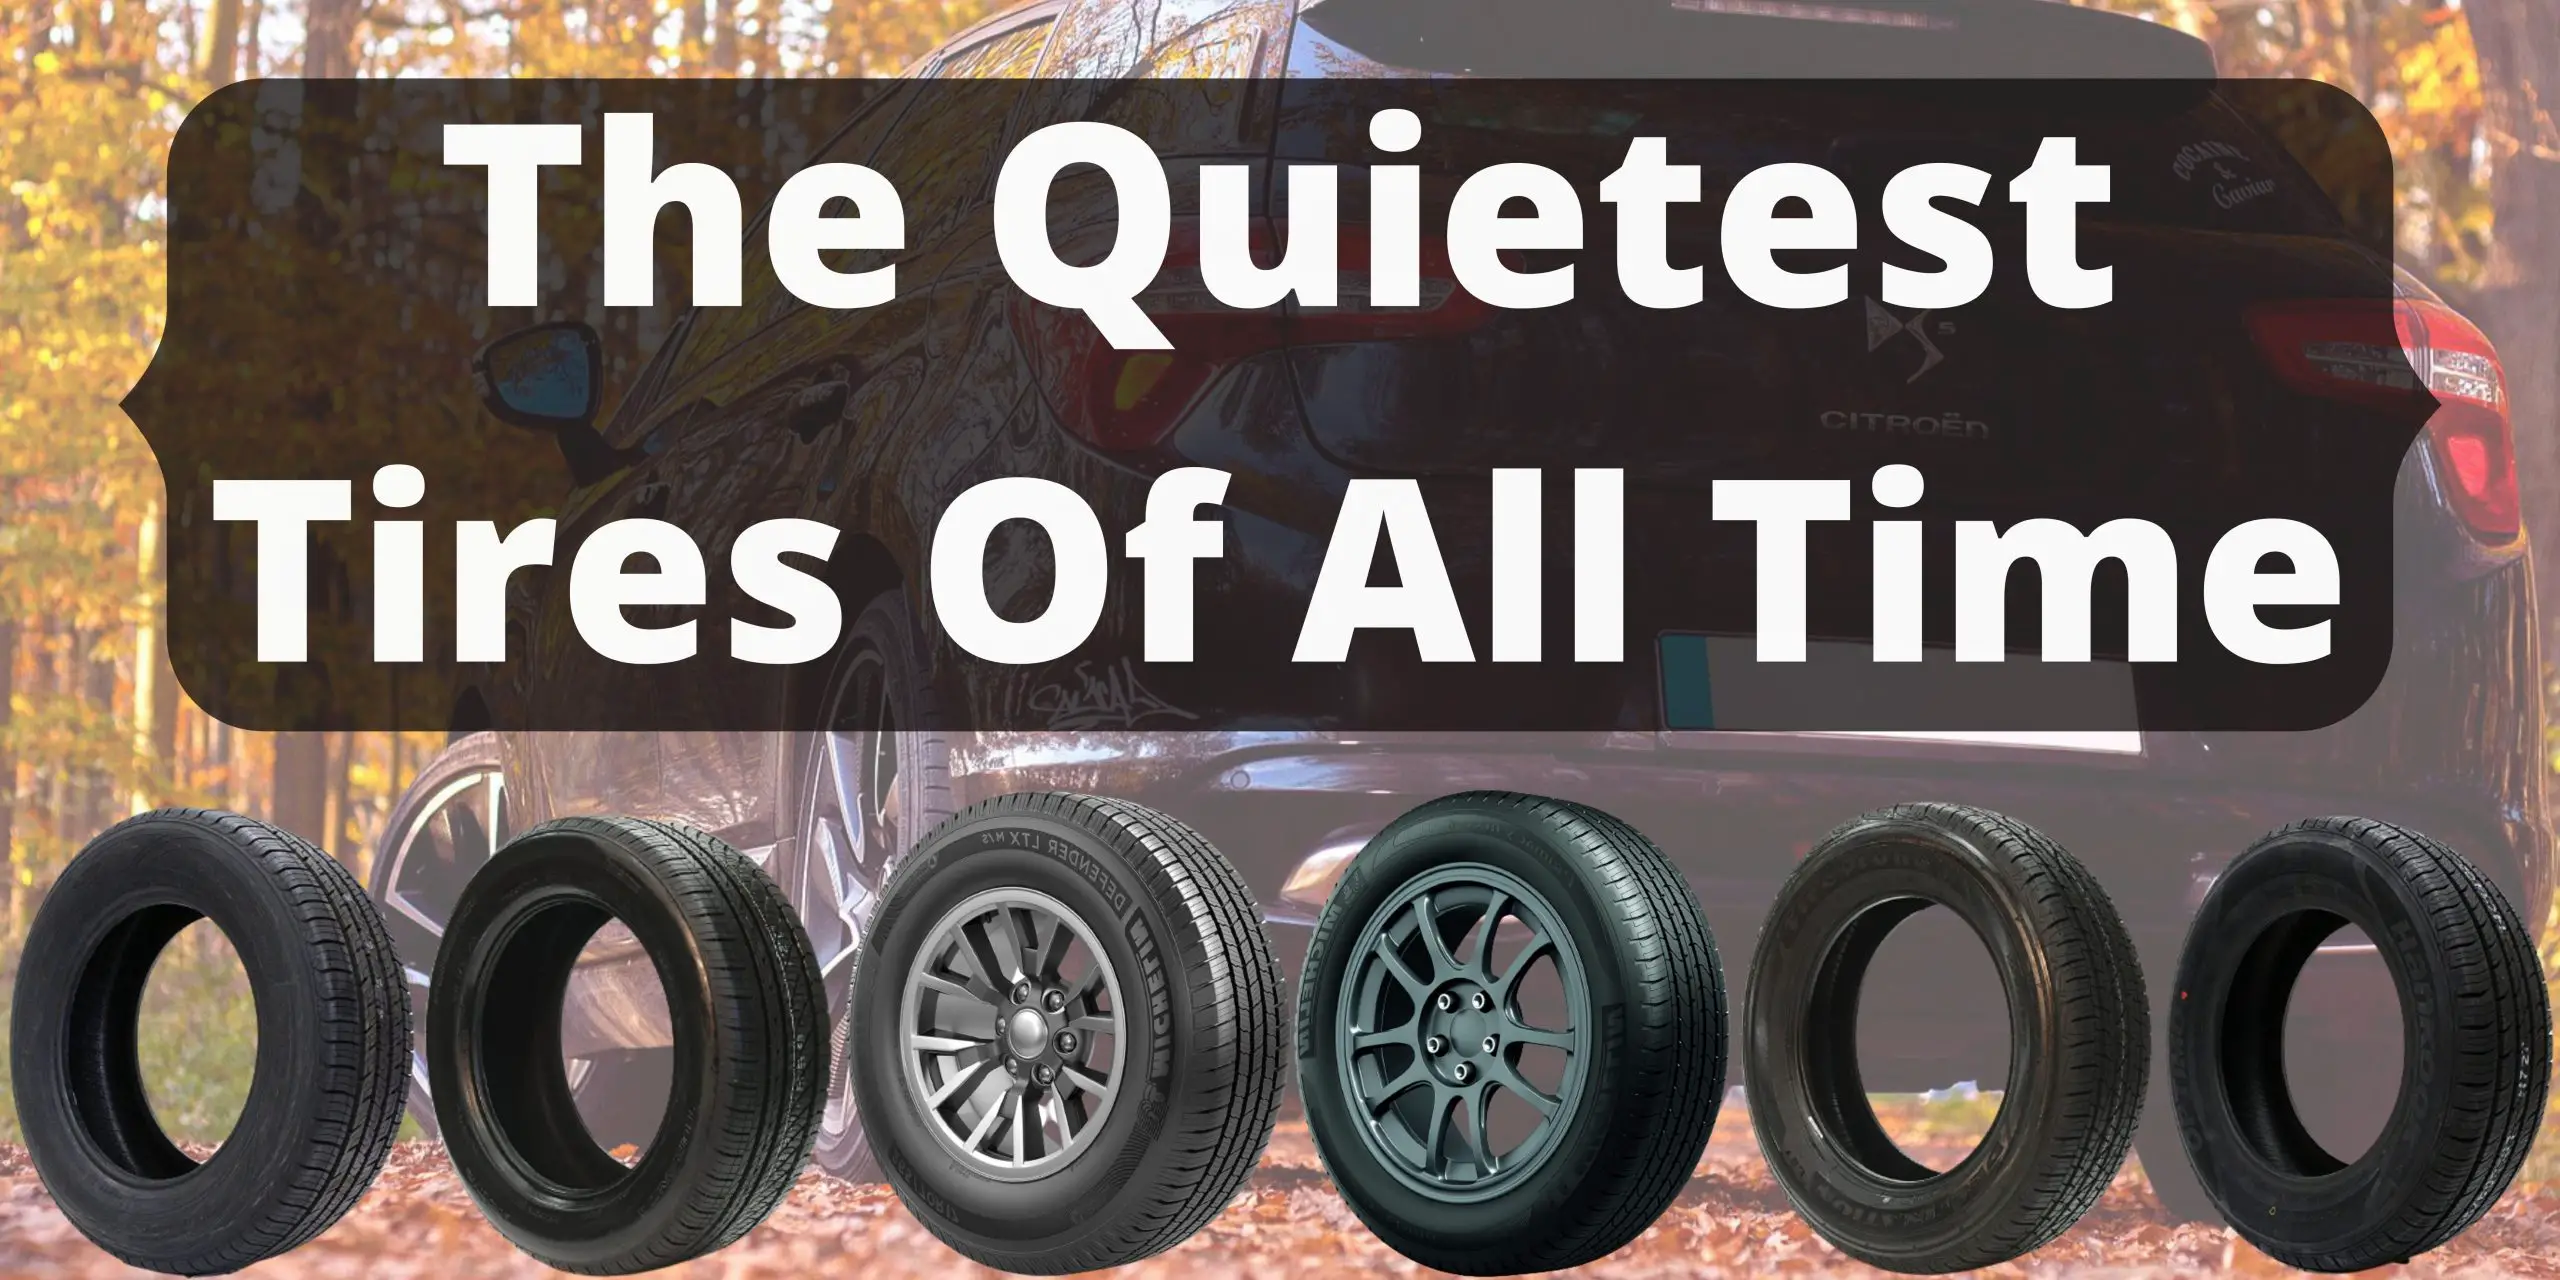 The Quietest Tires of All Time